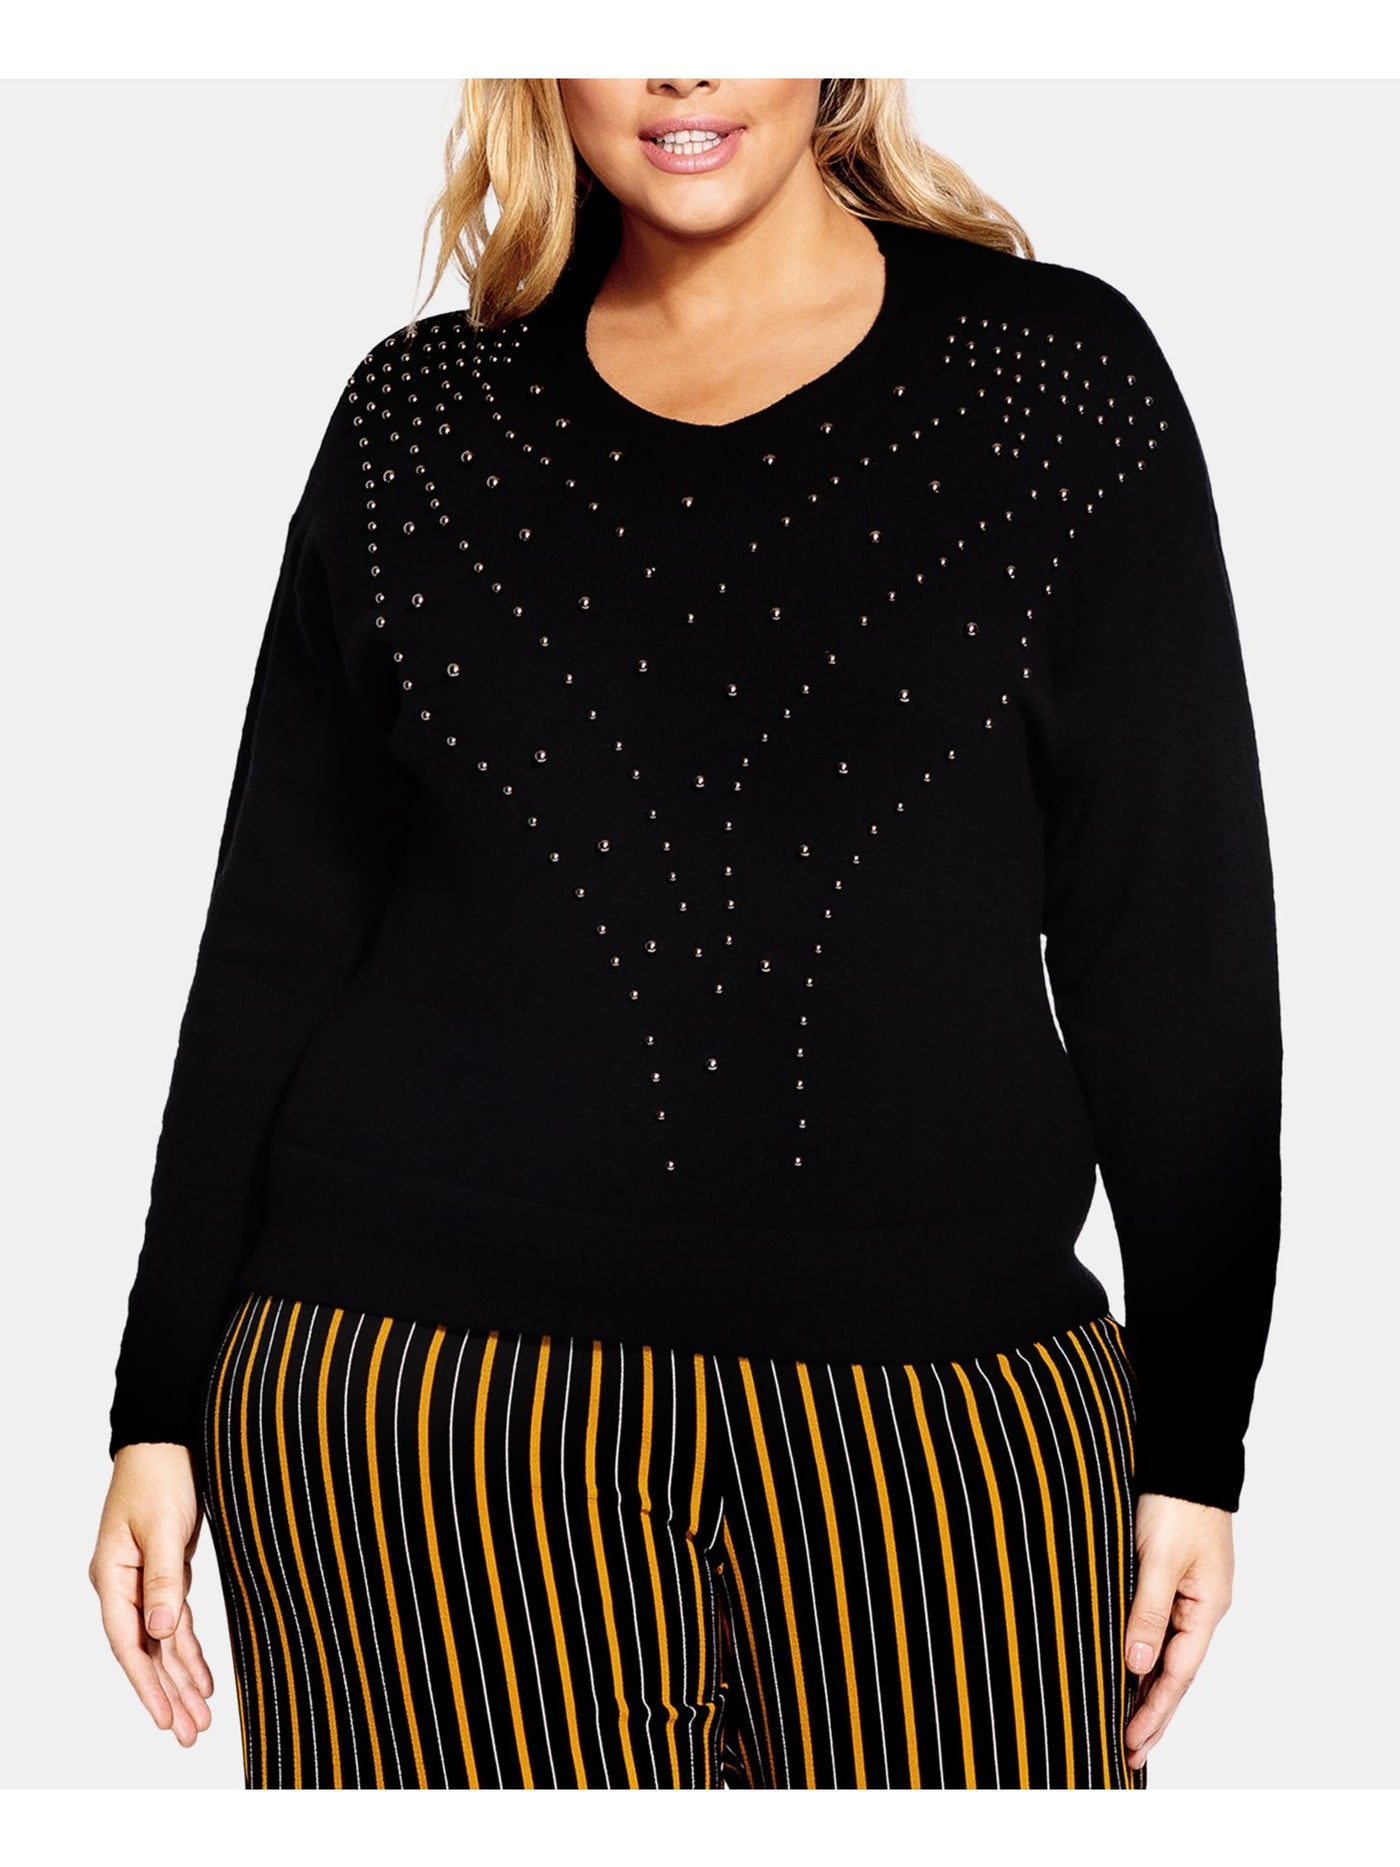 CITY CHIC Womens Black Embellished Long Sleeve Crew Neck Wear To Work Sweater S